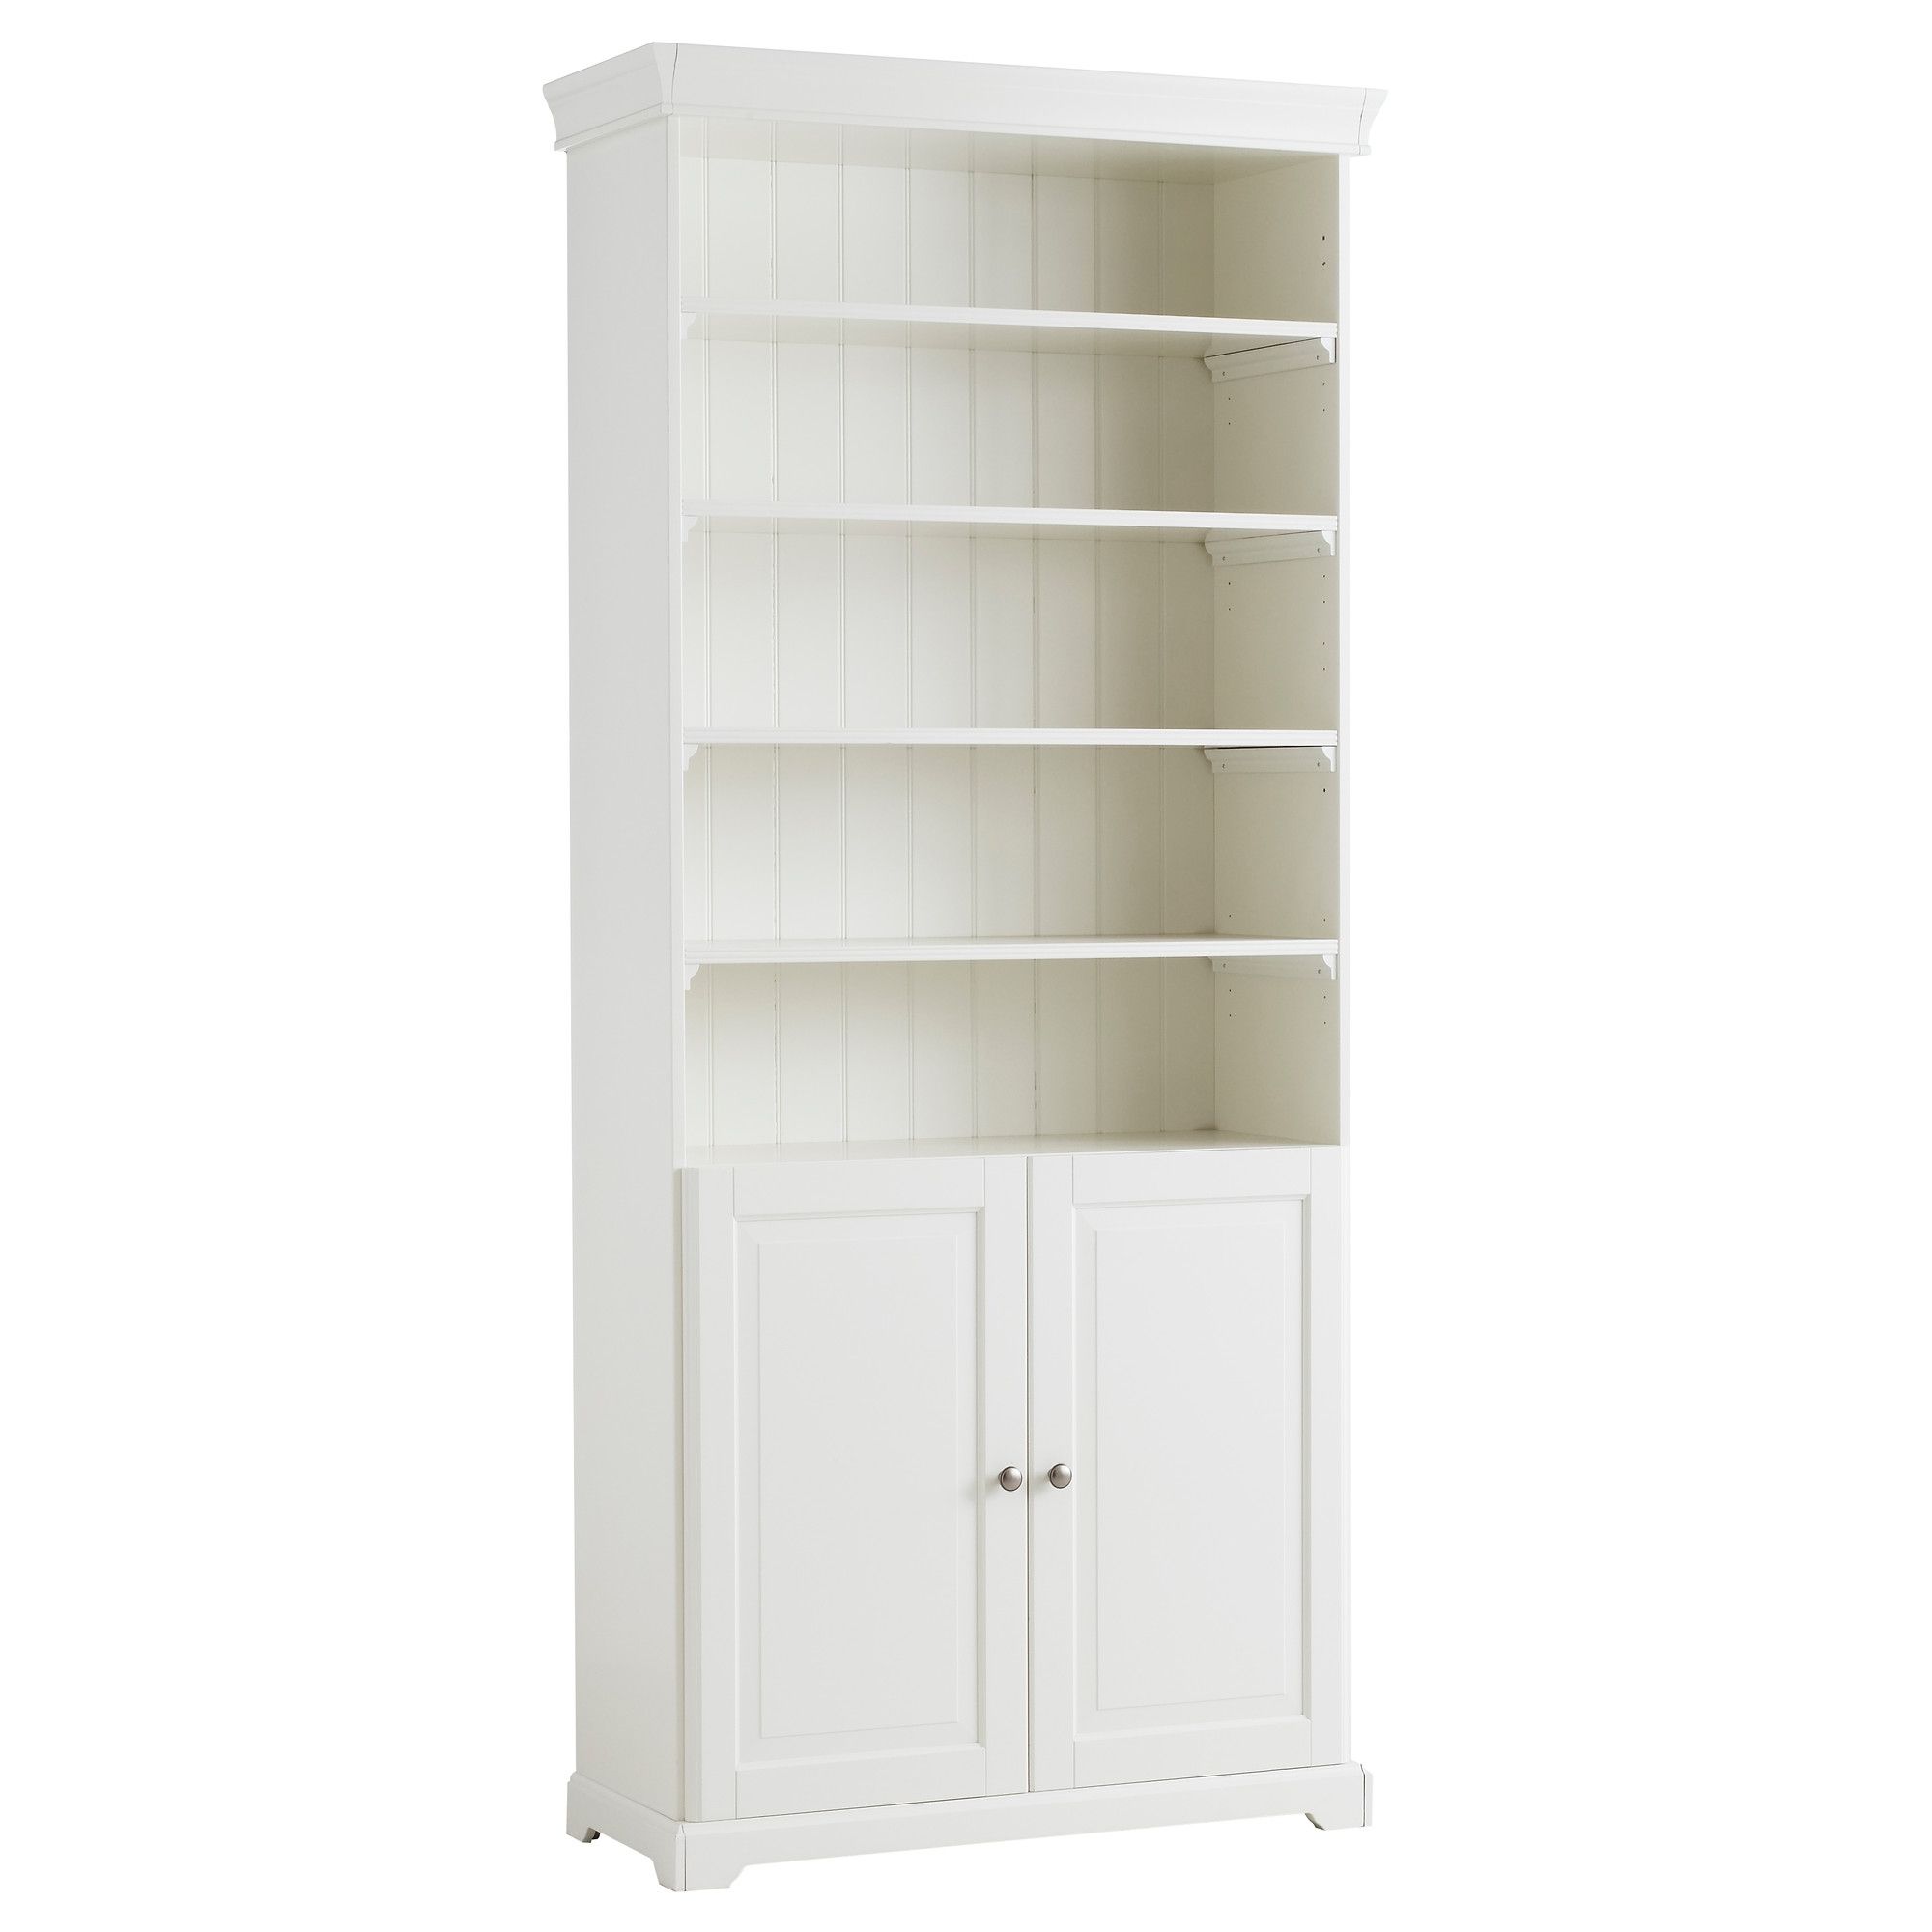 Whitease With Doors On Bottom Distressed Doorswhiteases For Sale Pertaining To Current Tall Bookcases With Doors (View 15 of 15)